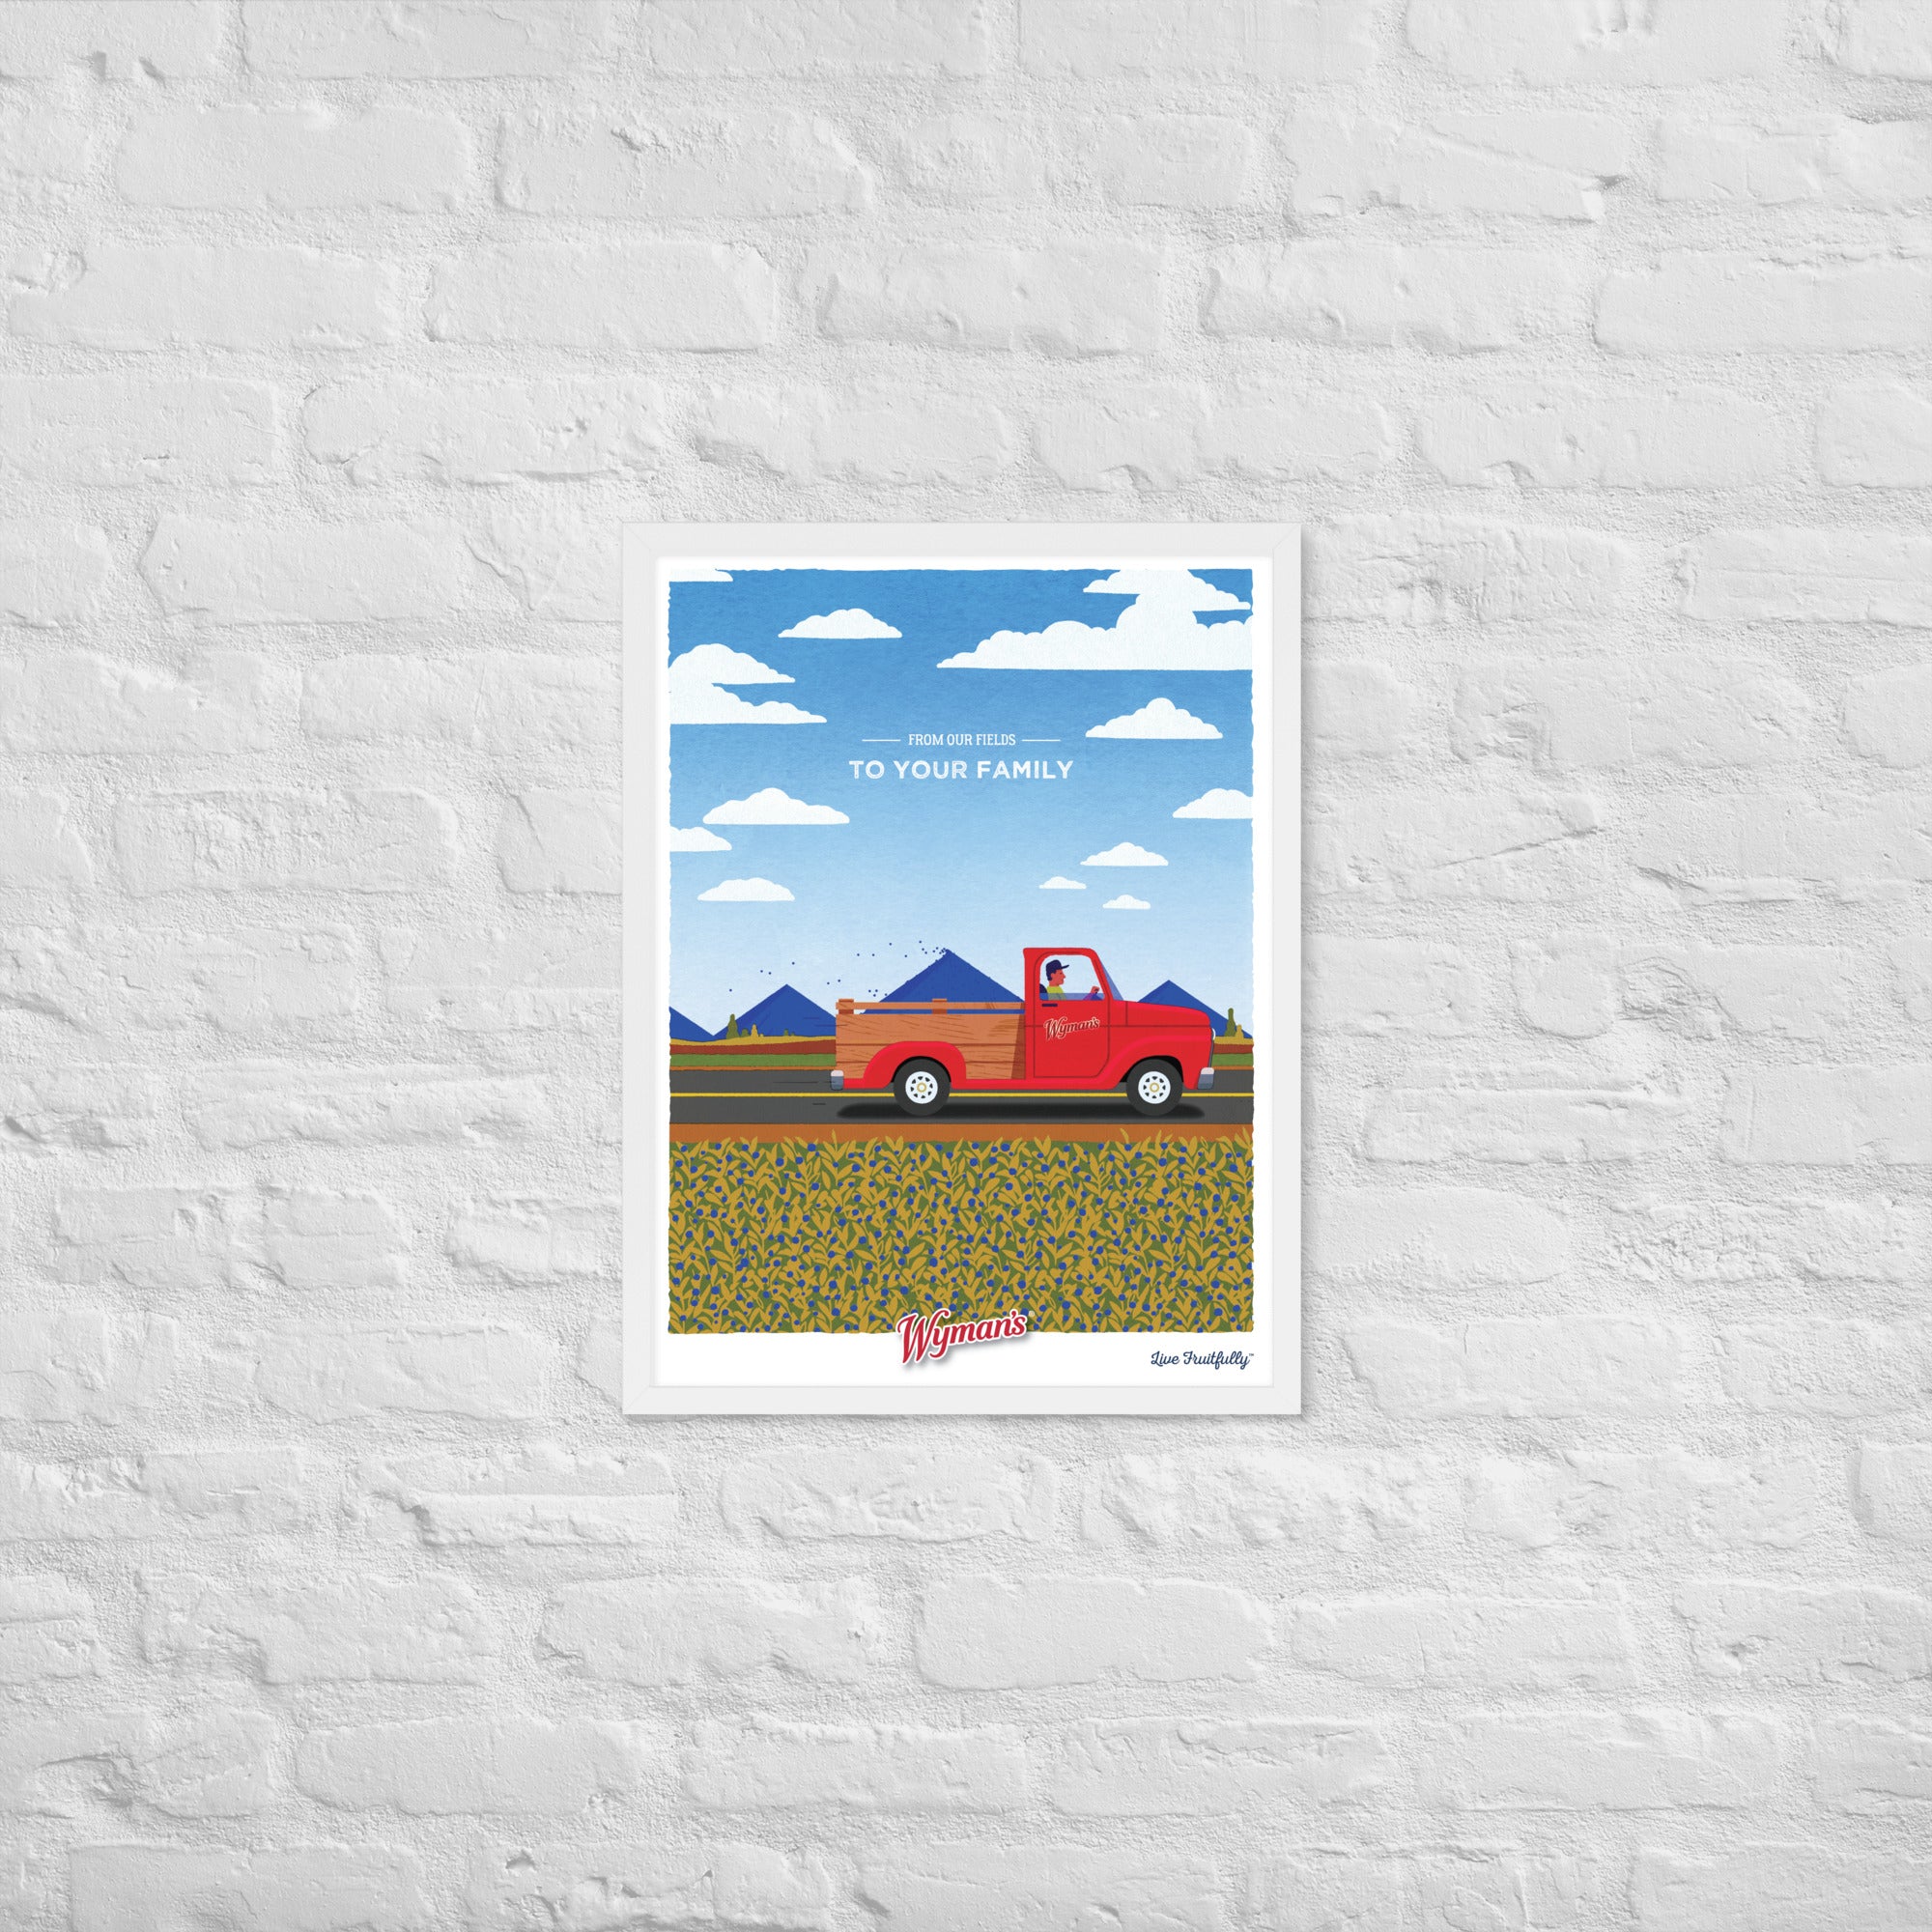 A From Our Fields to Your Family poster featuring a red truck printed on a brick wall design by Shop Wyman's.